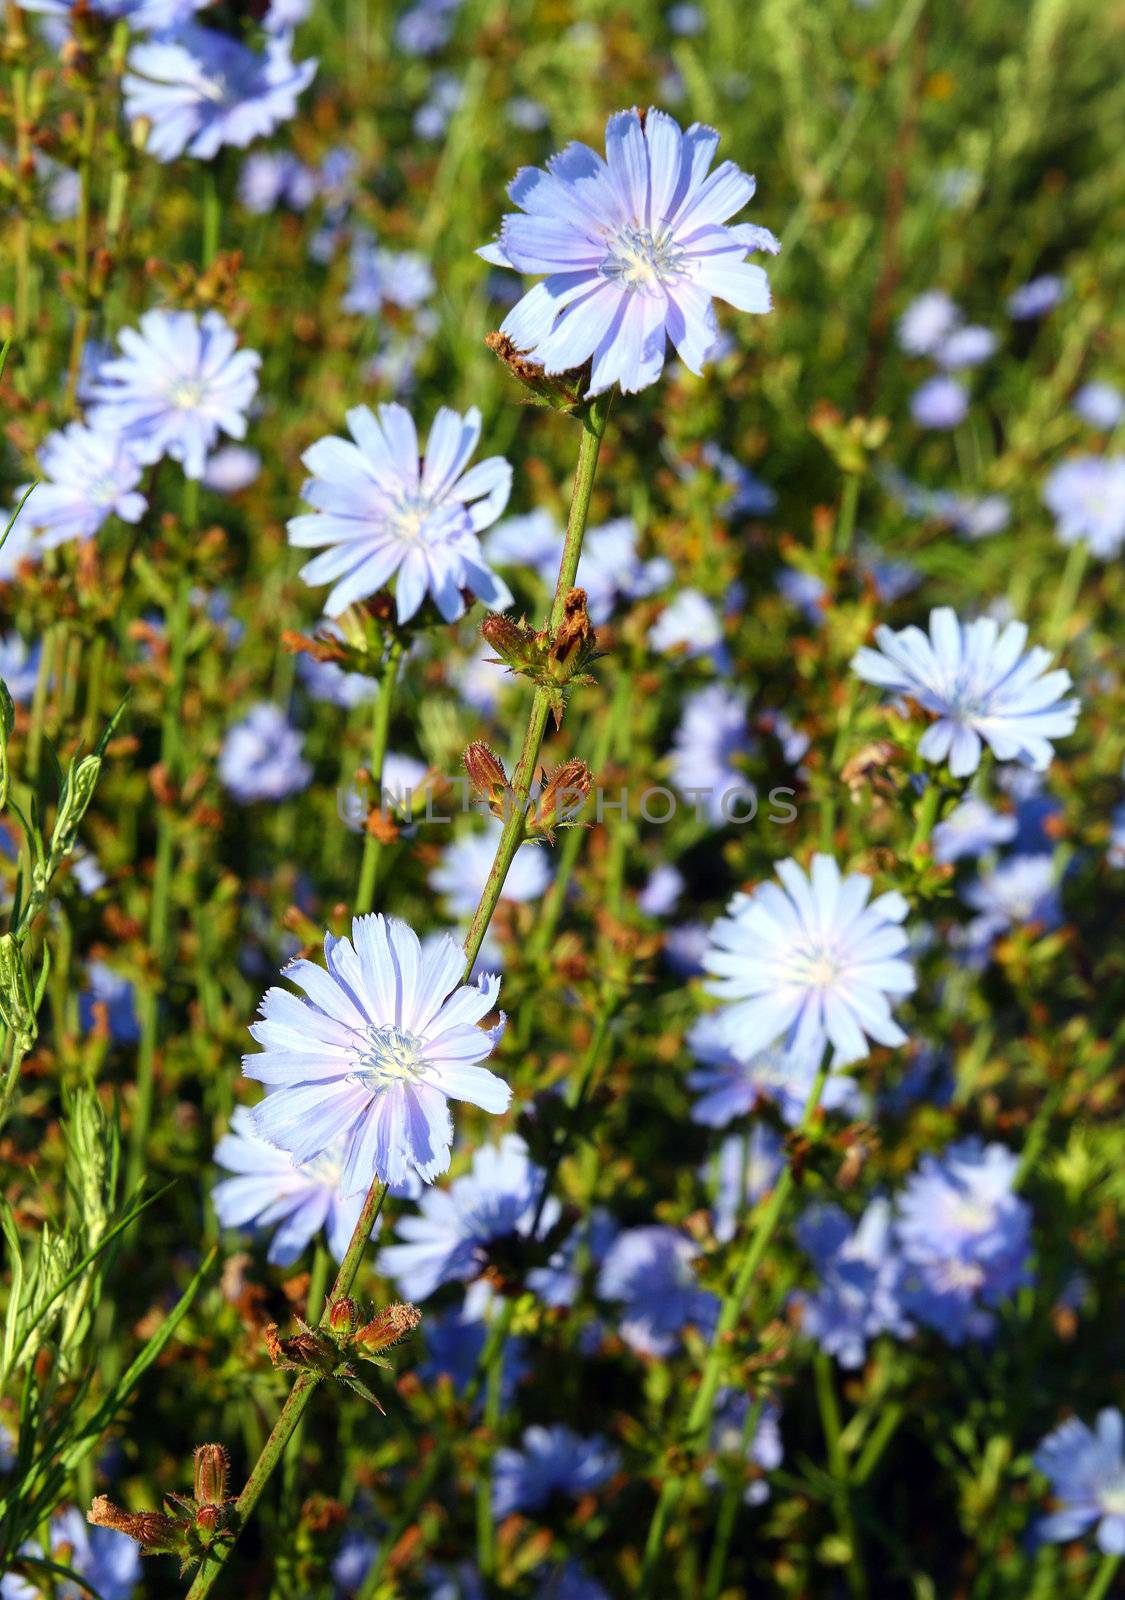 chicory flowers by Mikko